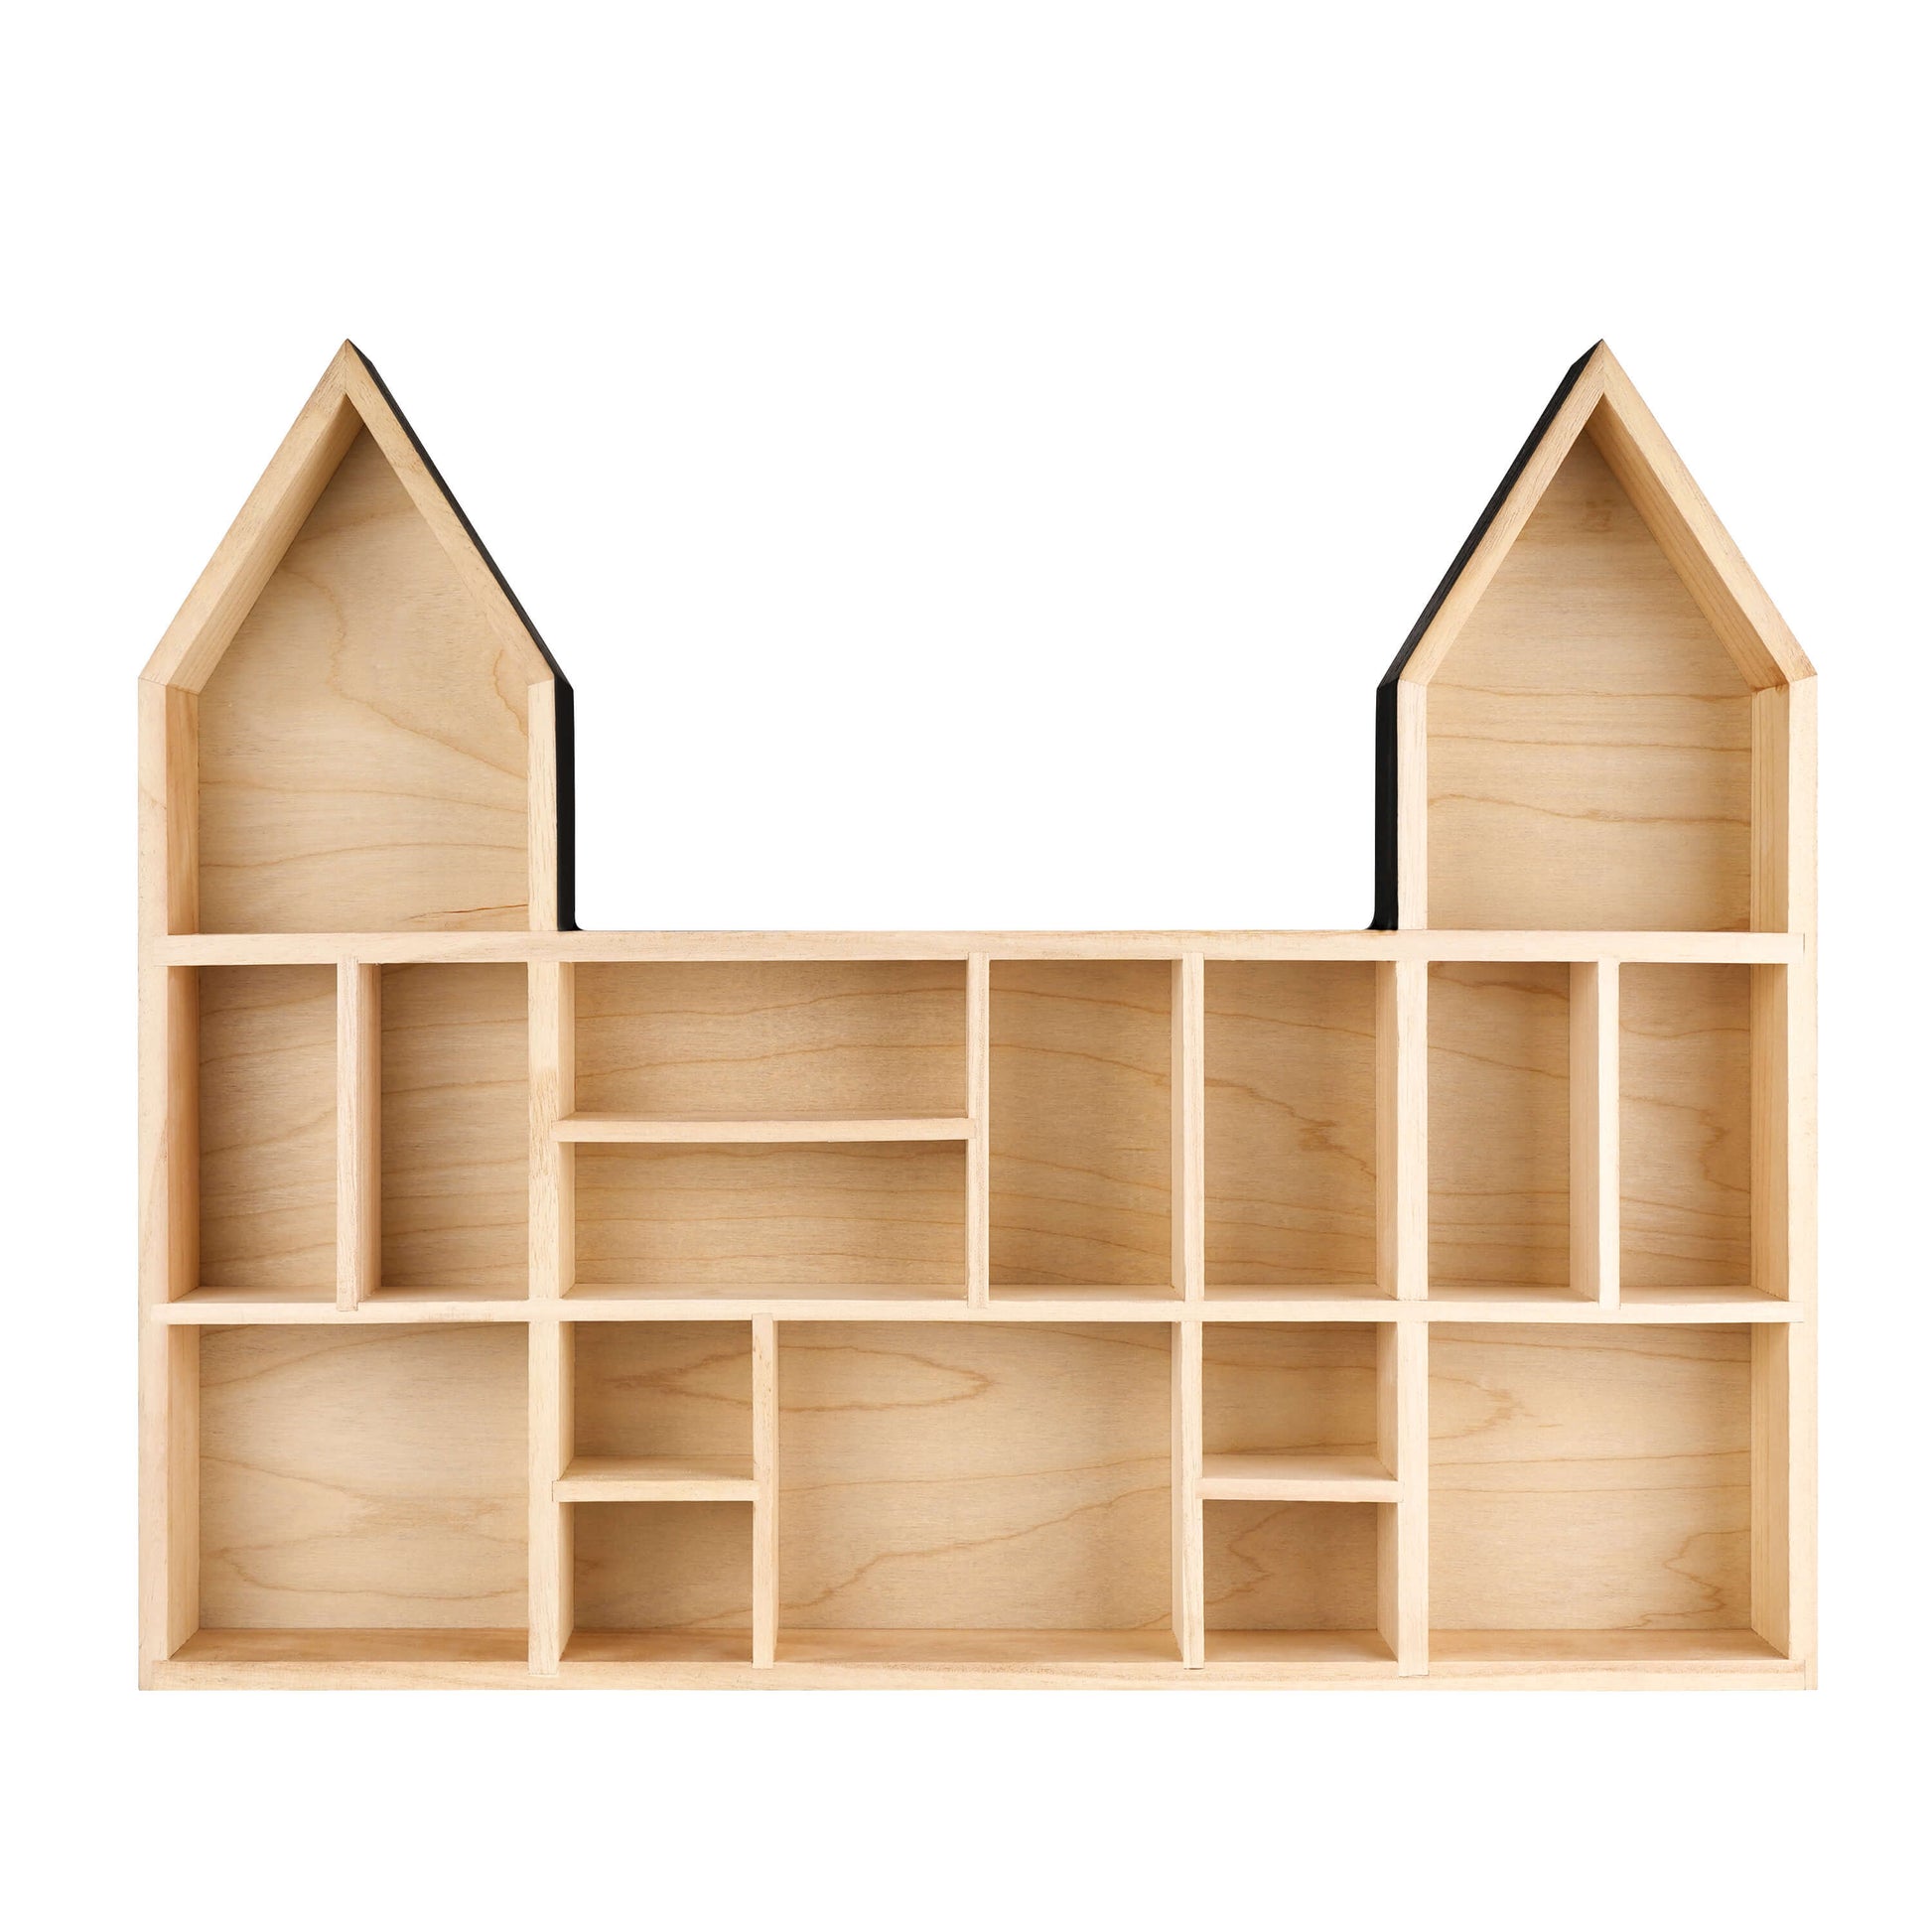 Castle shaped wooden toy display shelf with a black finish on the outside ( Empty, front view)